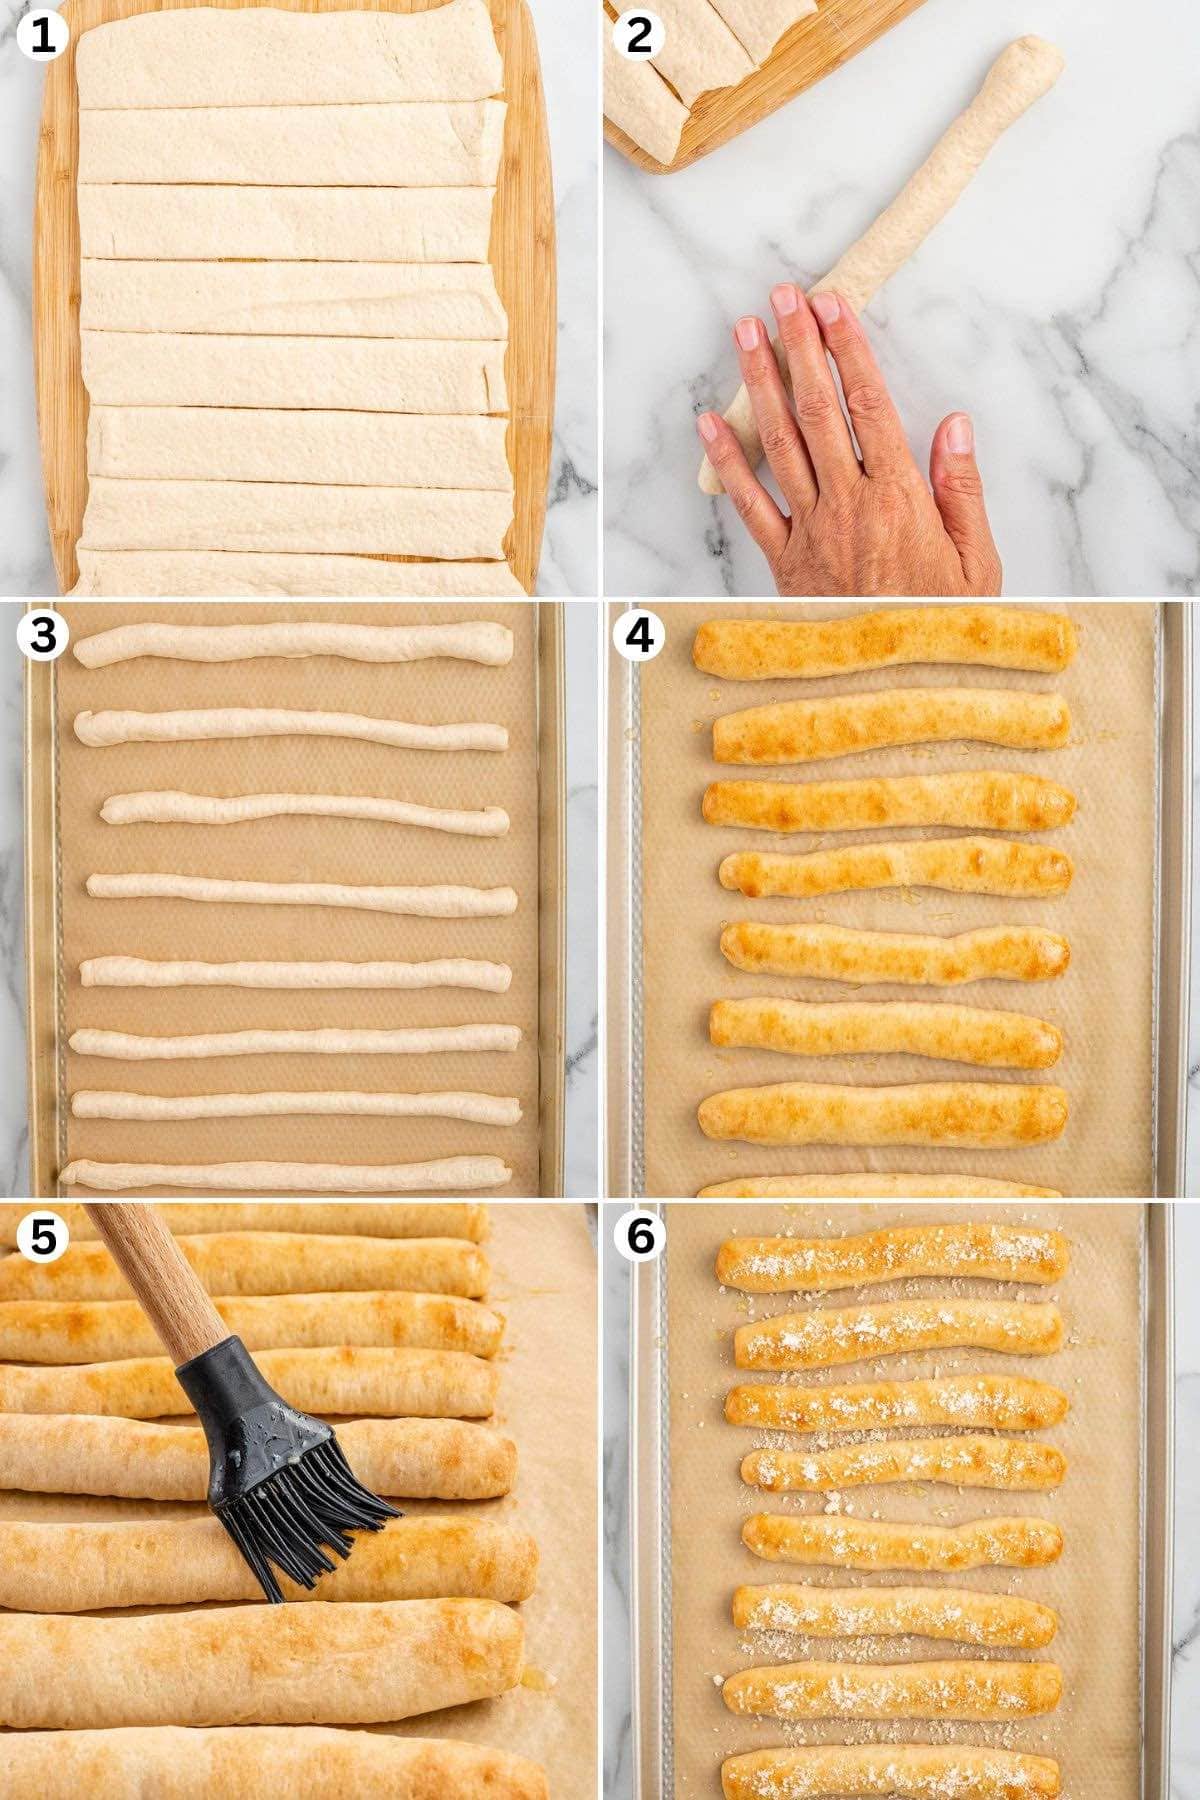 Unroll the dough into a large rectangle and cut 8 strips. Roll the dough and place in baking tray. brush with butter. Sprinkle parmesan cheese on top of the bread.